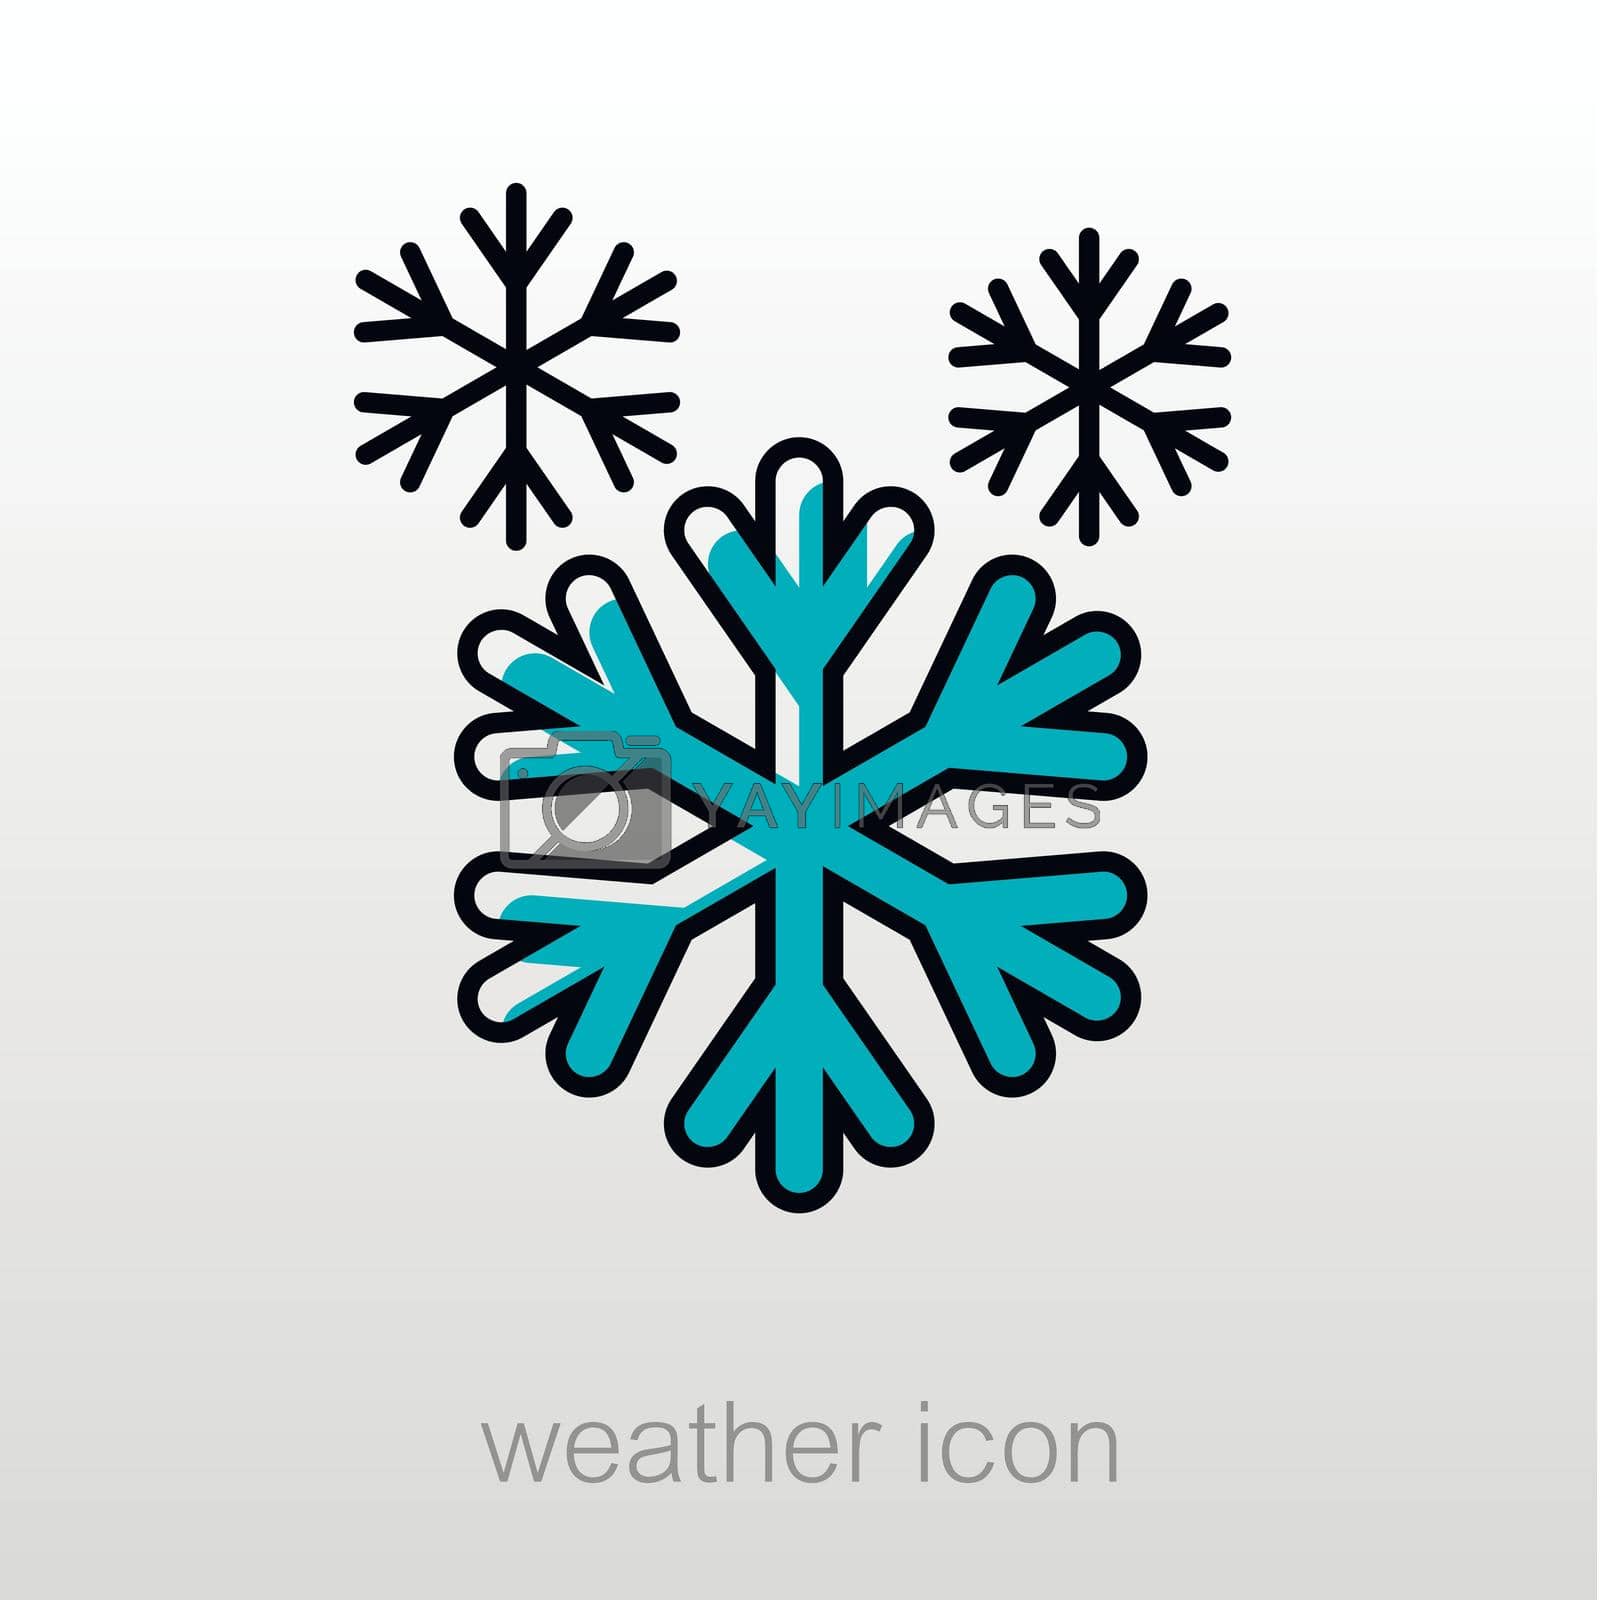 Snowflake Snow outline icon. Meteorology. Weather. Vector illustration eps 10